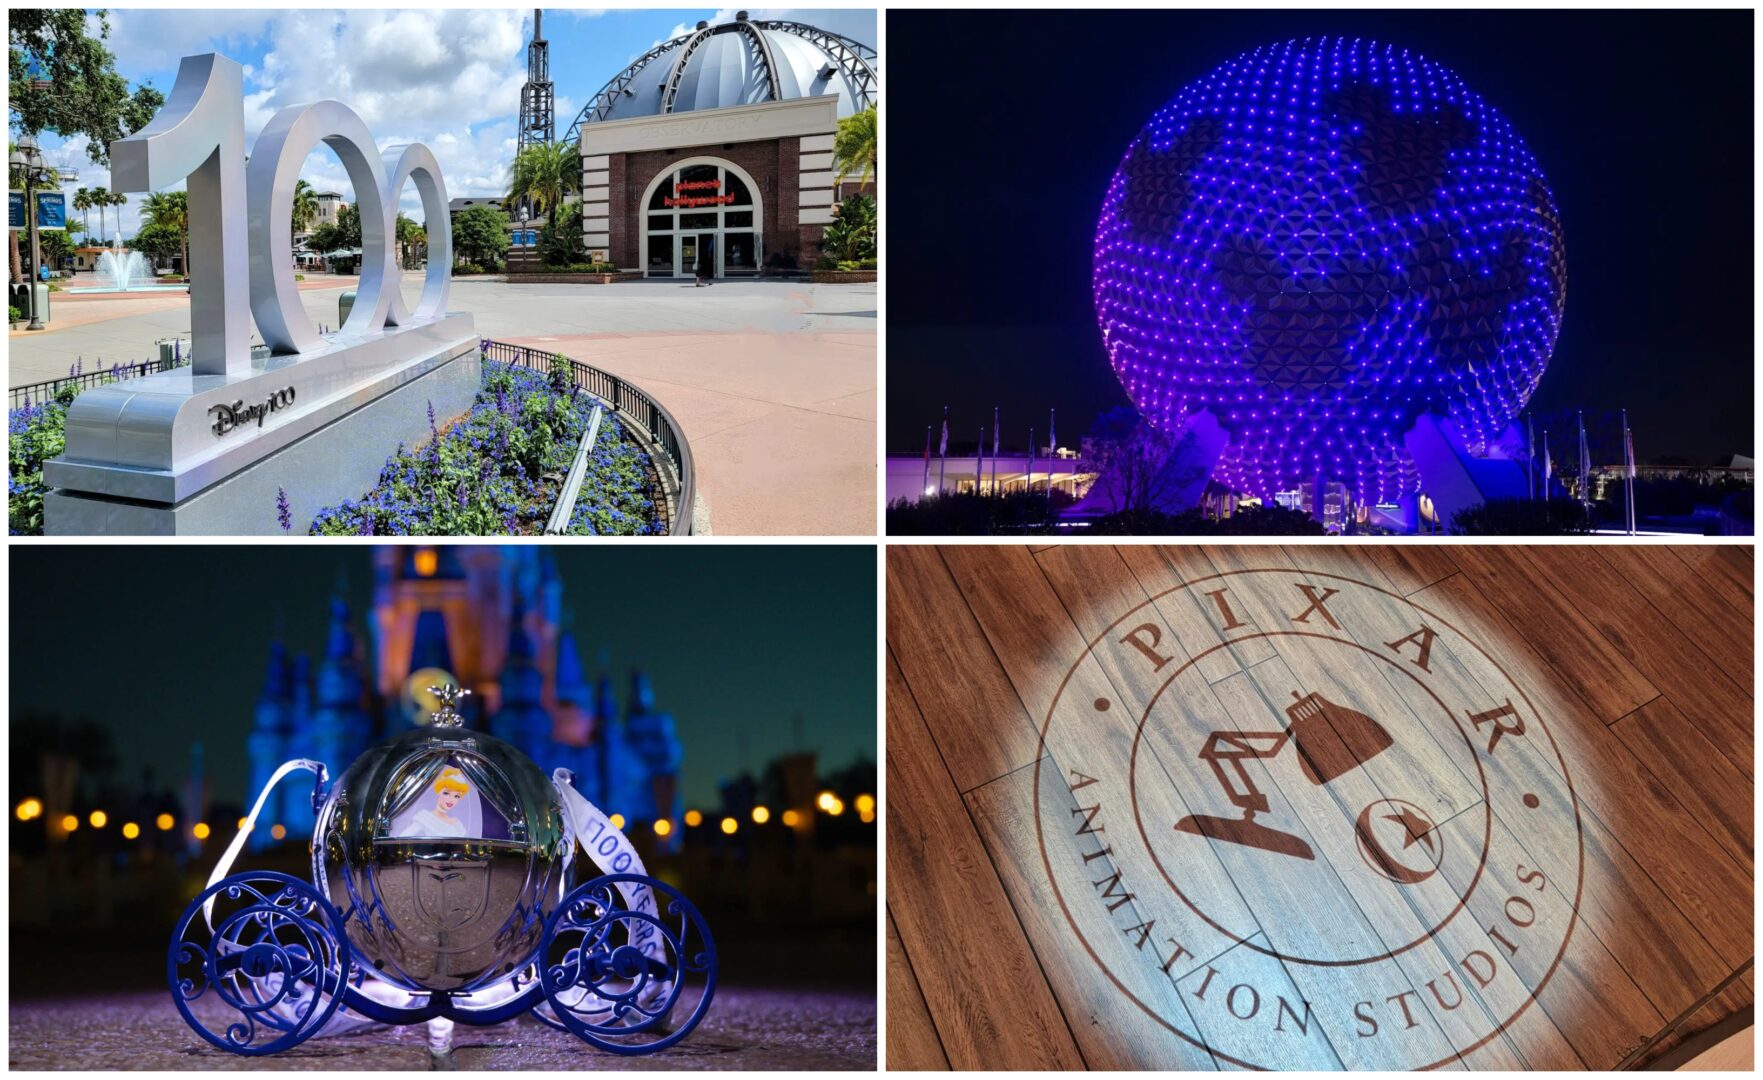 Disney News Highlights: Disney Lawyers Come Out Swinging in New Lawsuit Against Governor, May The Fourth Celebration at Disney Parks, Disney100 at Walt Disney World